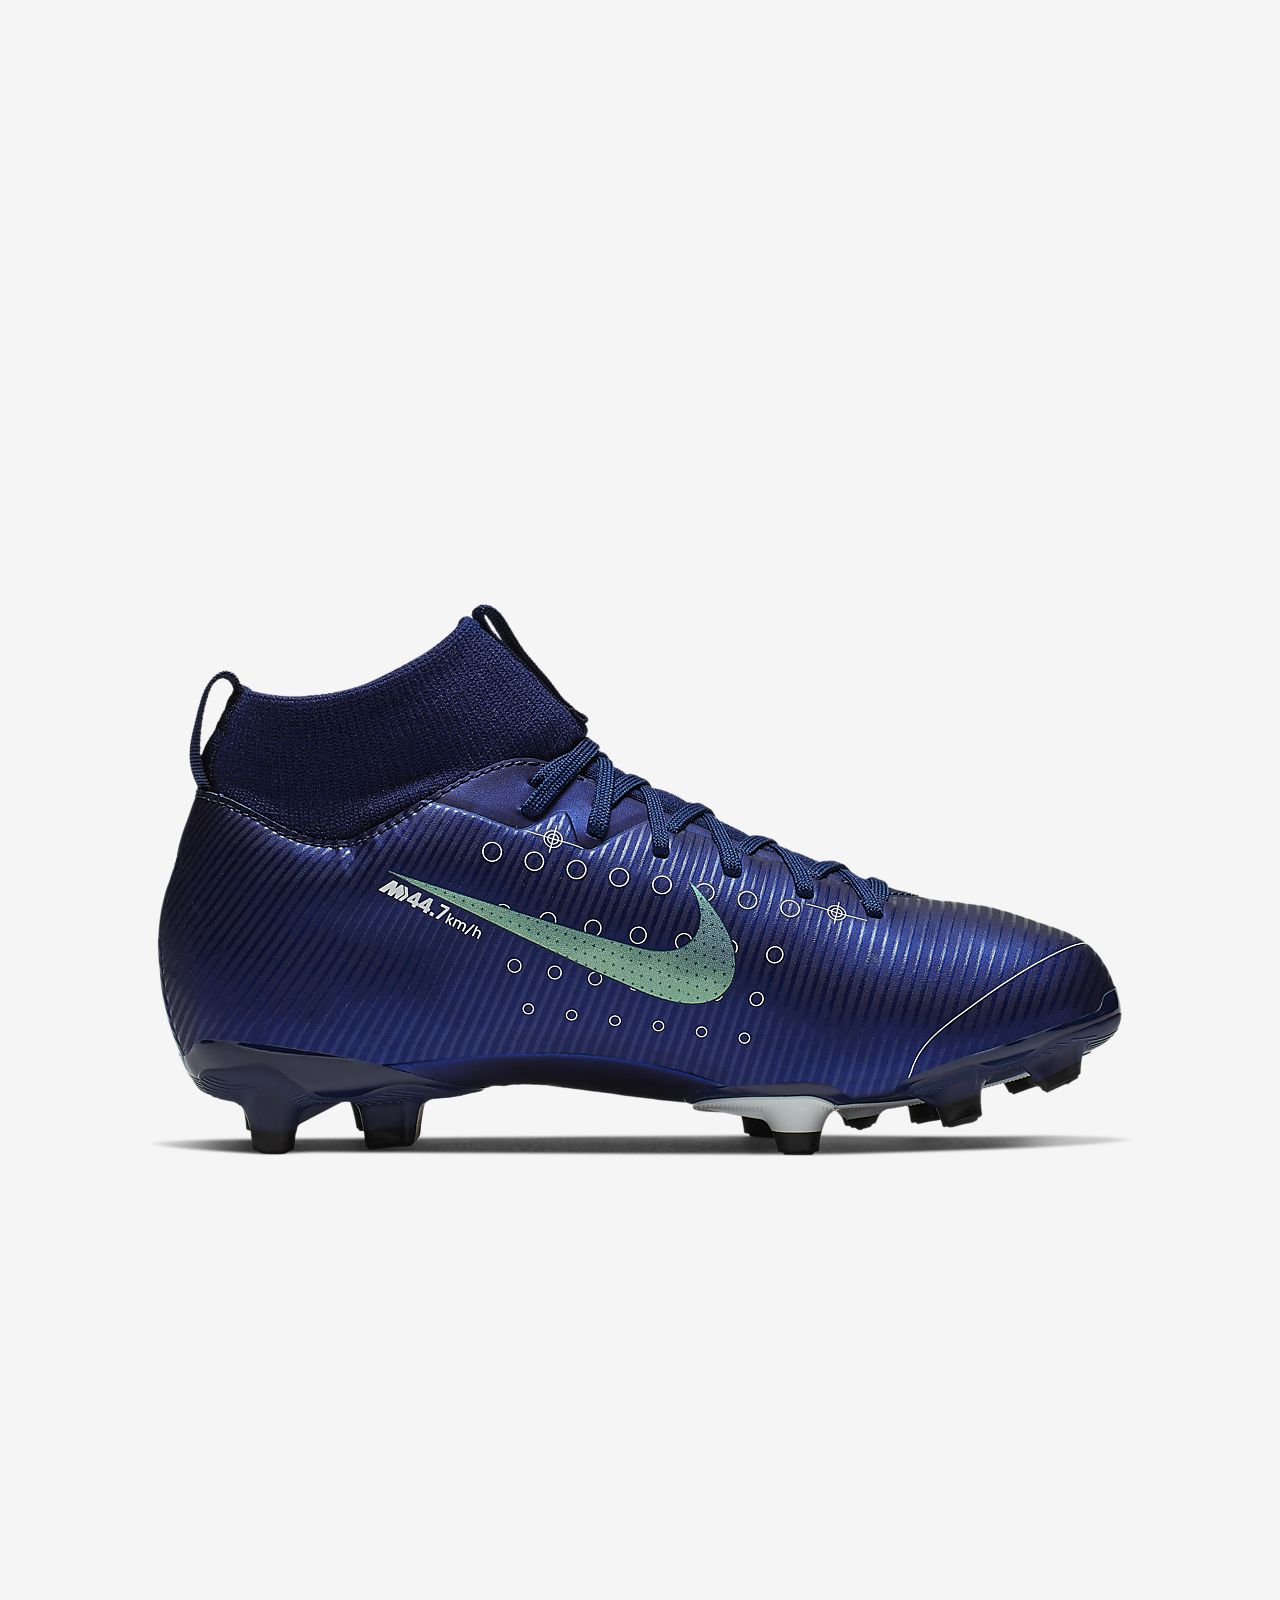 Nike Mercurial Superfly V Cr7 Agpro Football Boots in Lyst